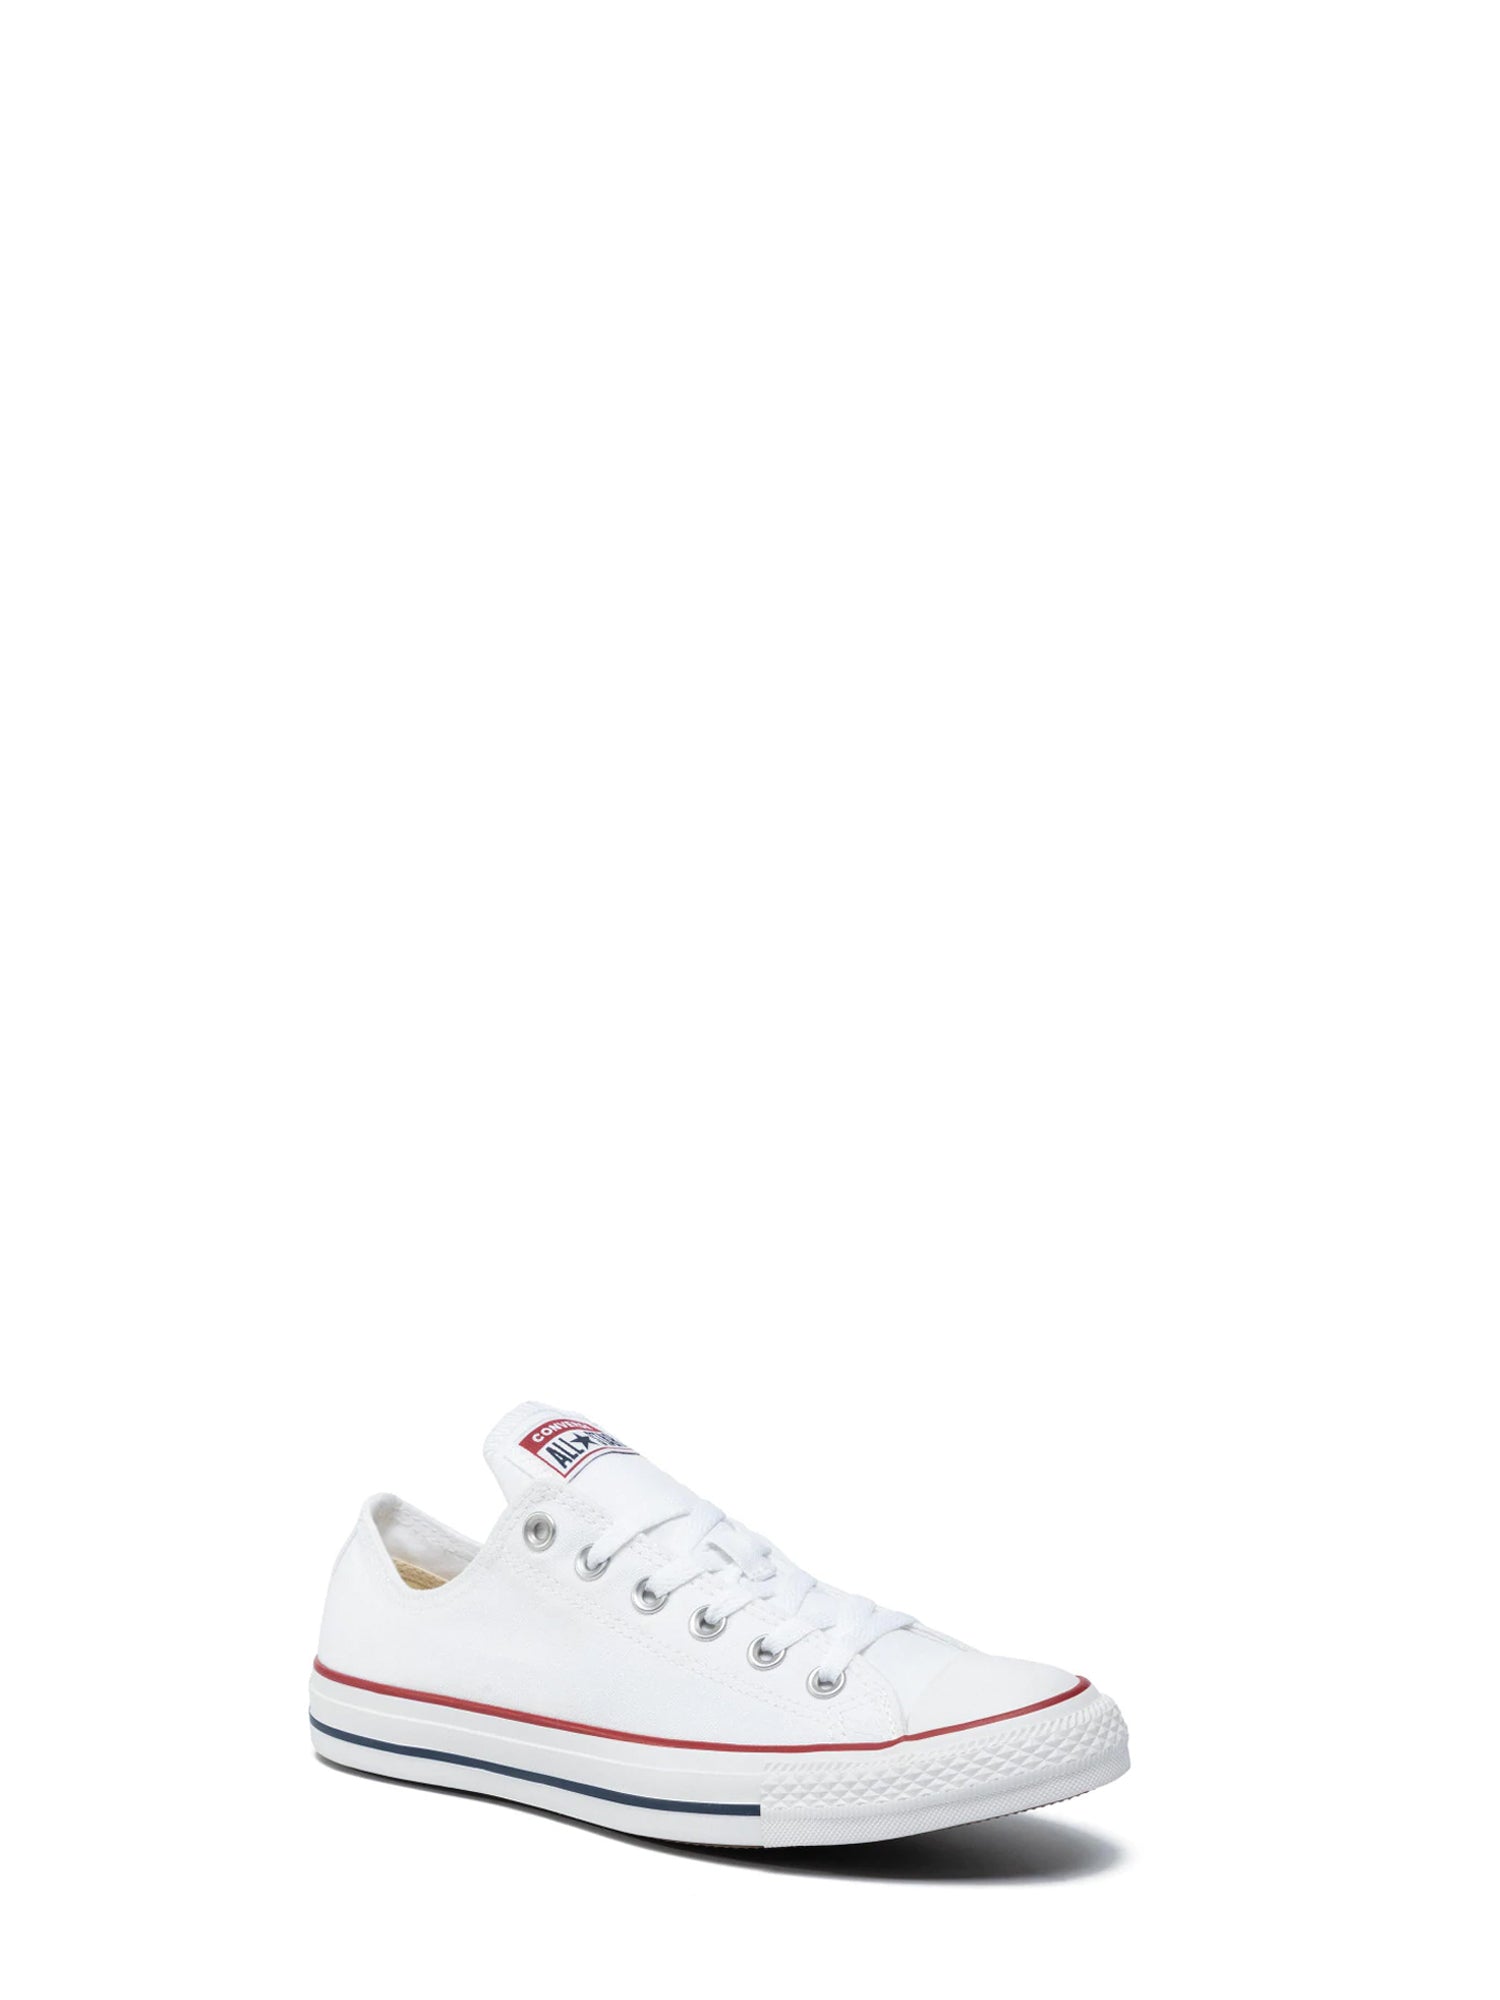 CONVERSE SNEAKERS CHUCK TAYLOR ALL STAR CLASSIC BIANCO